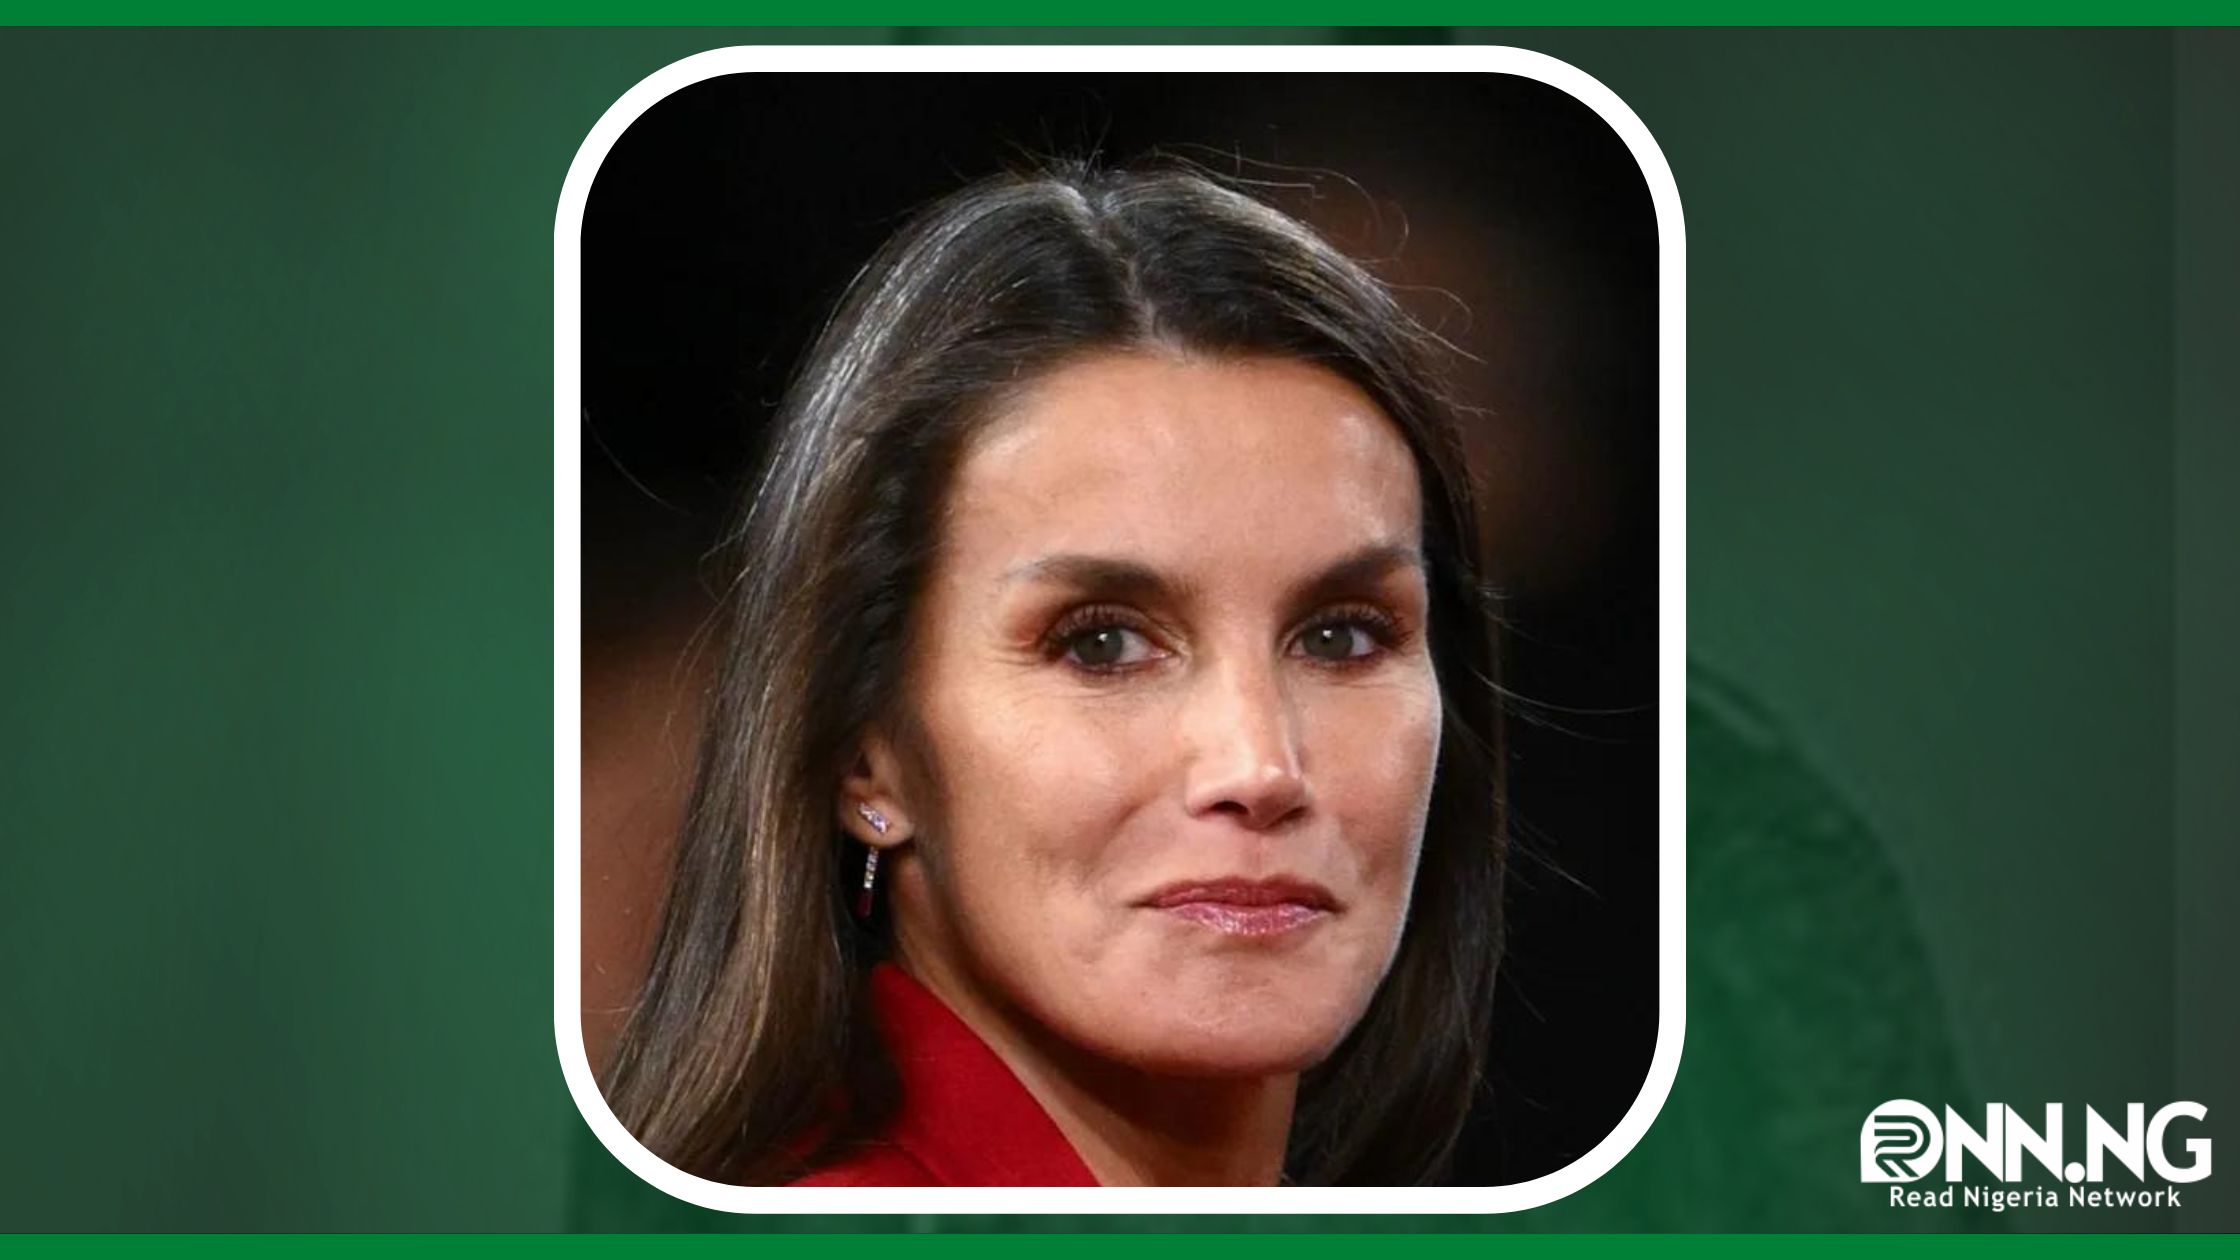 Queen Letizia of Spain Biography And Net Worth